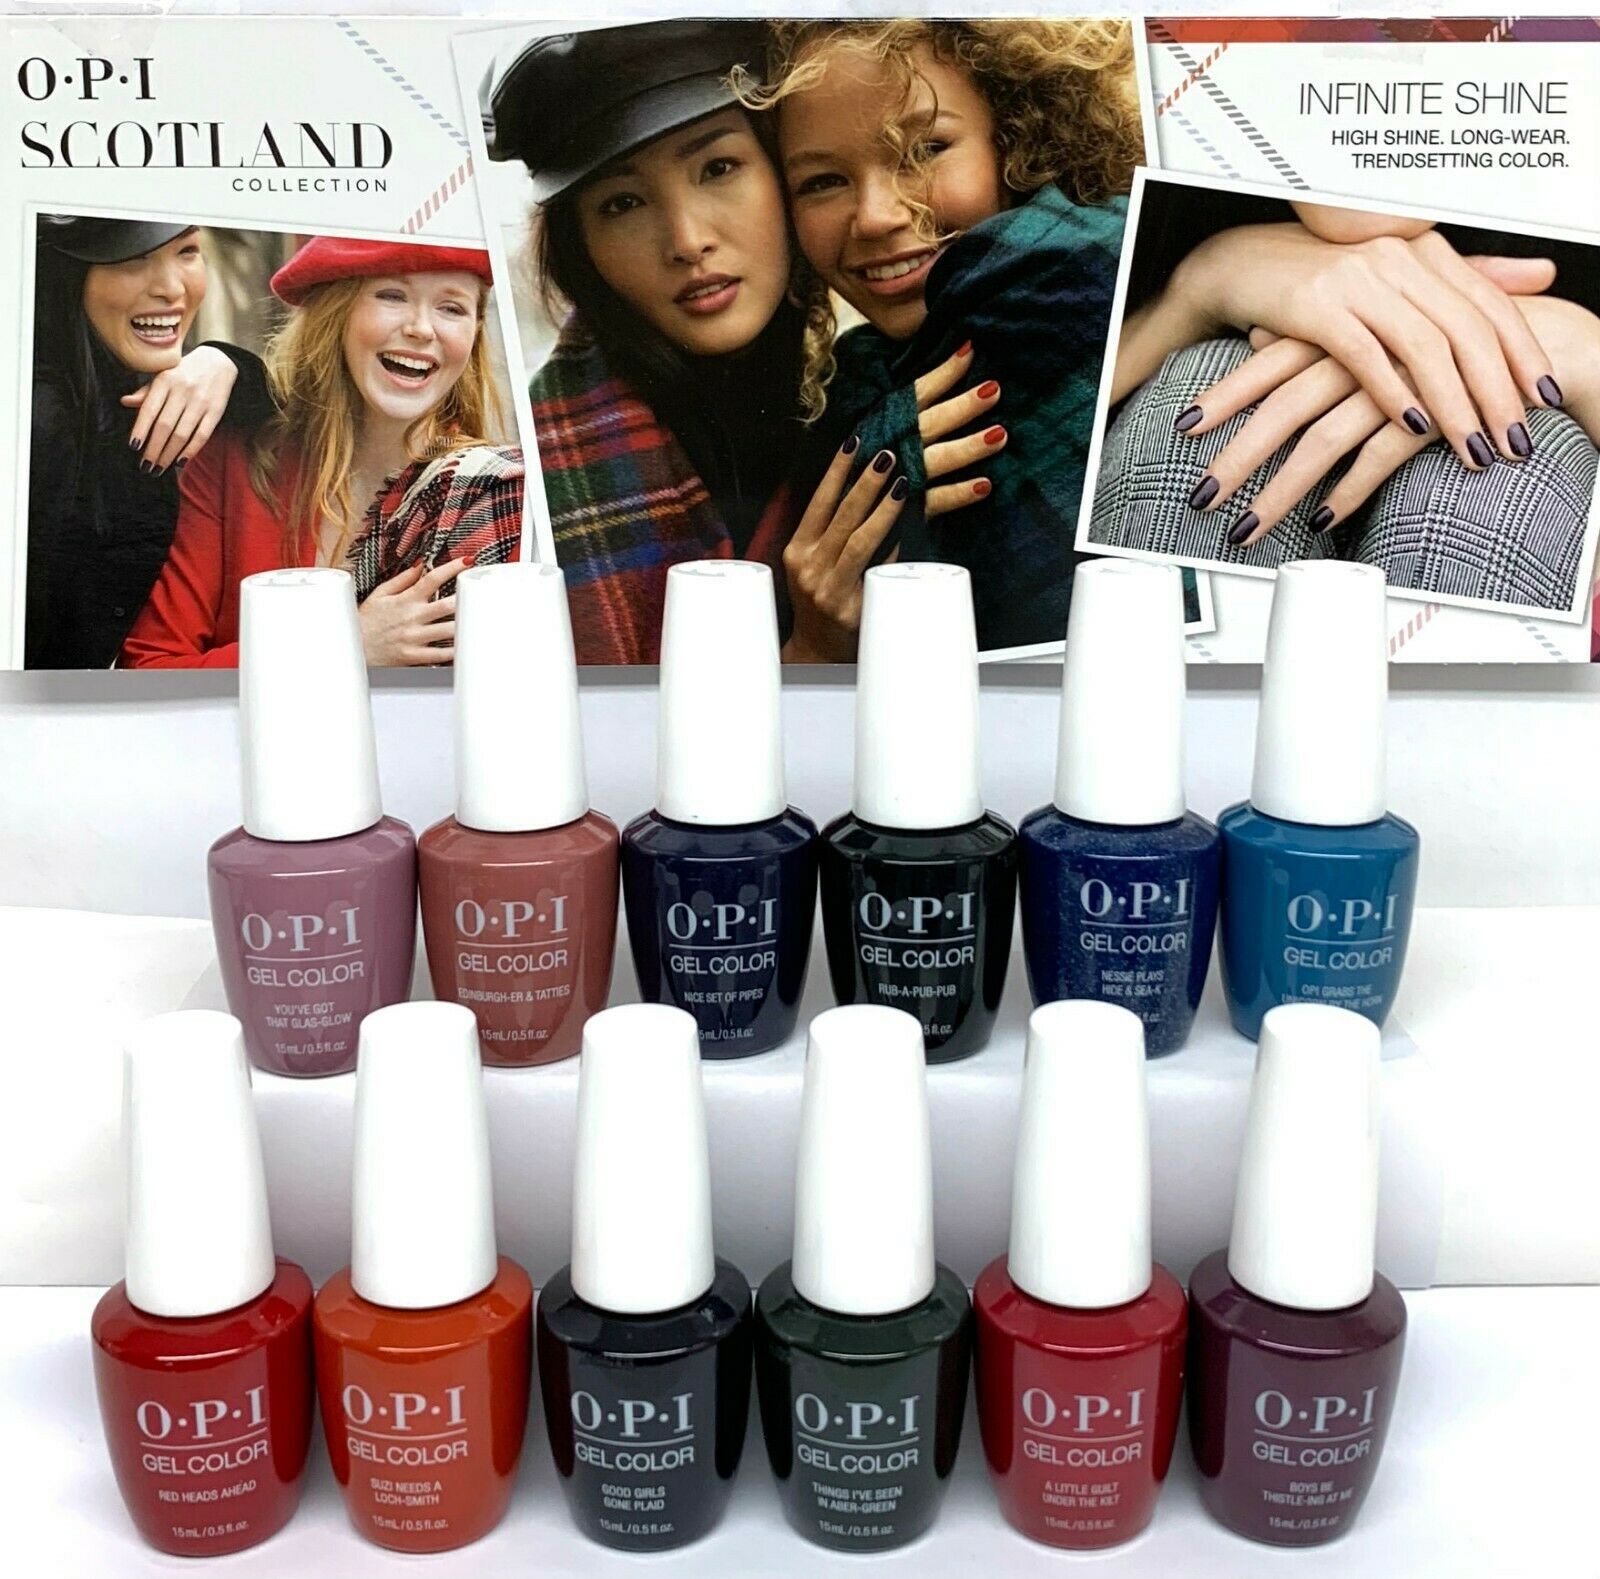 OPI Gelcolor Nail Polish - SCOTLAND 2019 FALL Collection - Pick Any Color